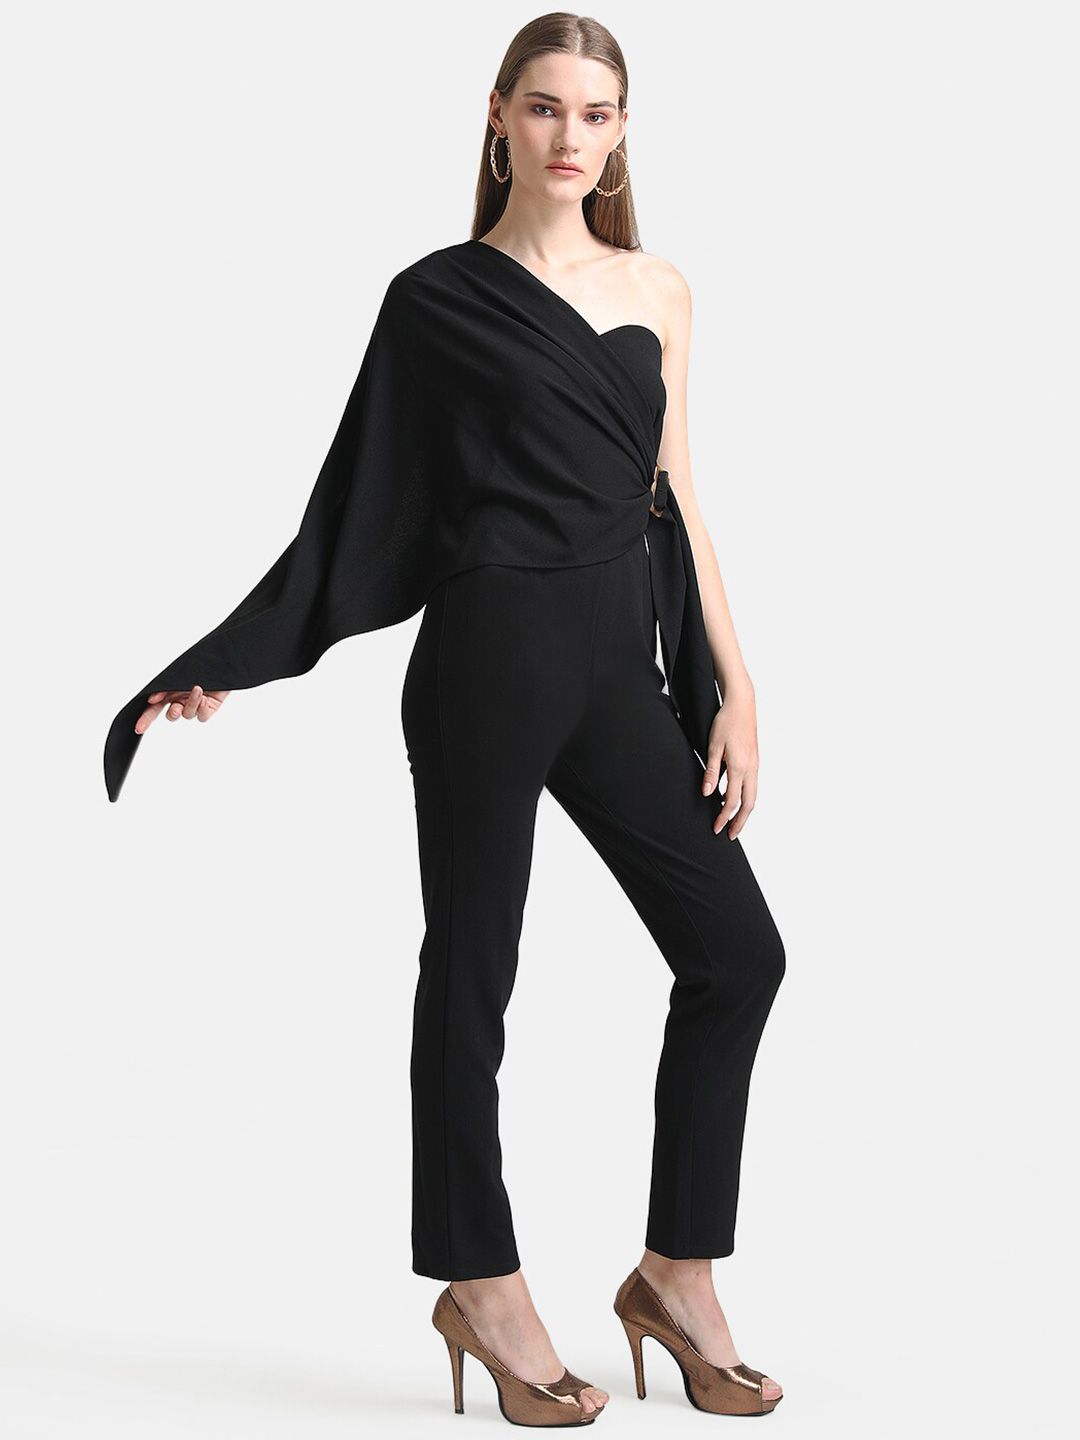 Kazo Black Assymetric Buckle Detail Jumpsuit Price in India